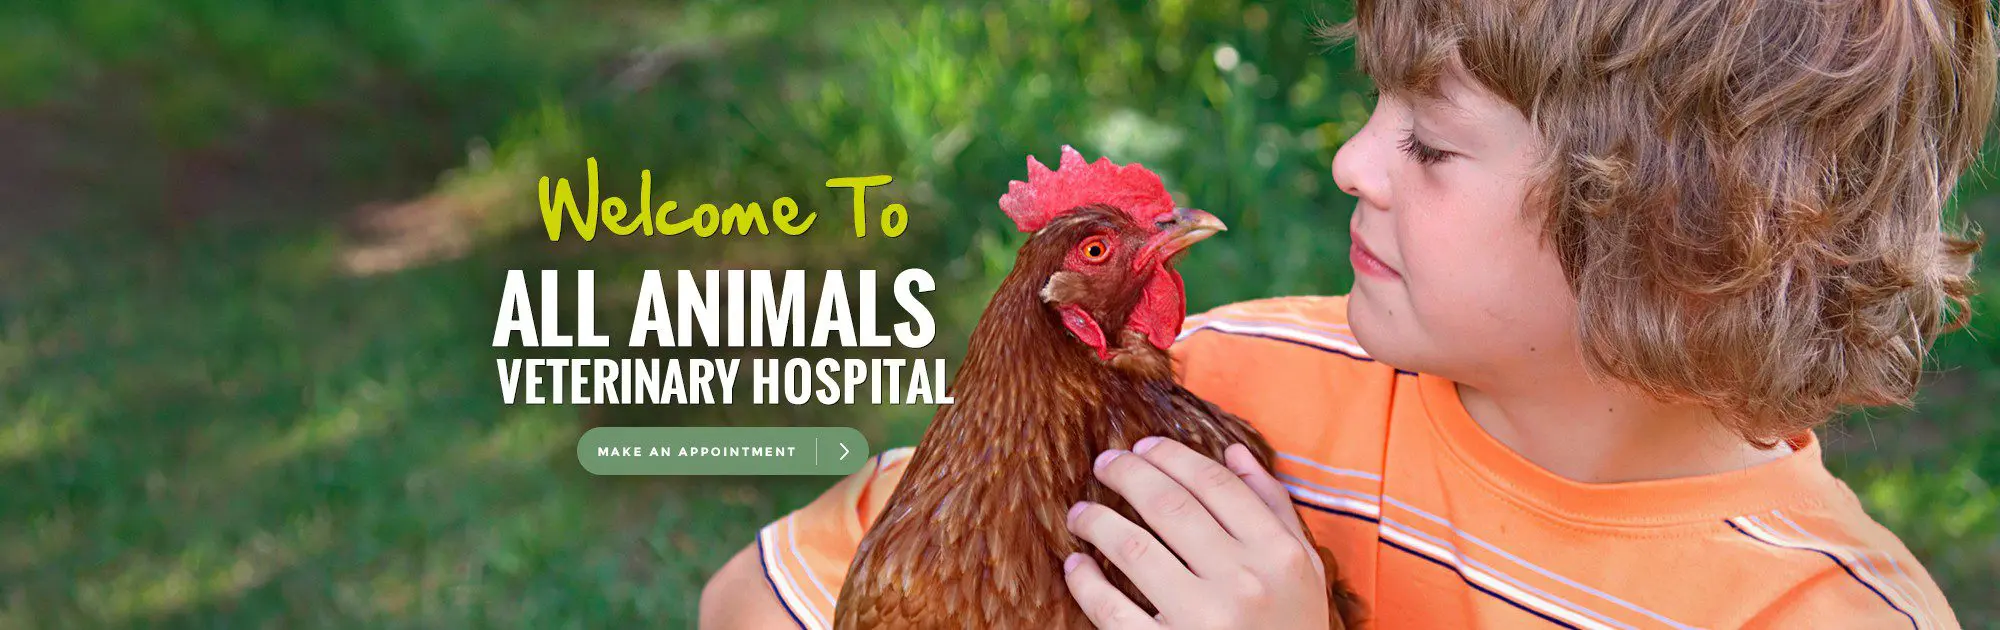 Welcome to All Animals Veterinary Hospital. Make an Appointment